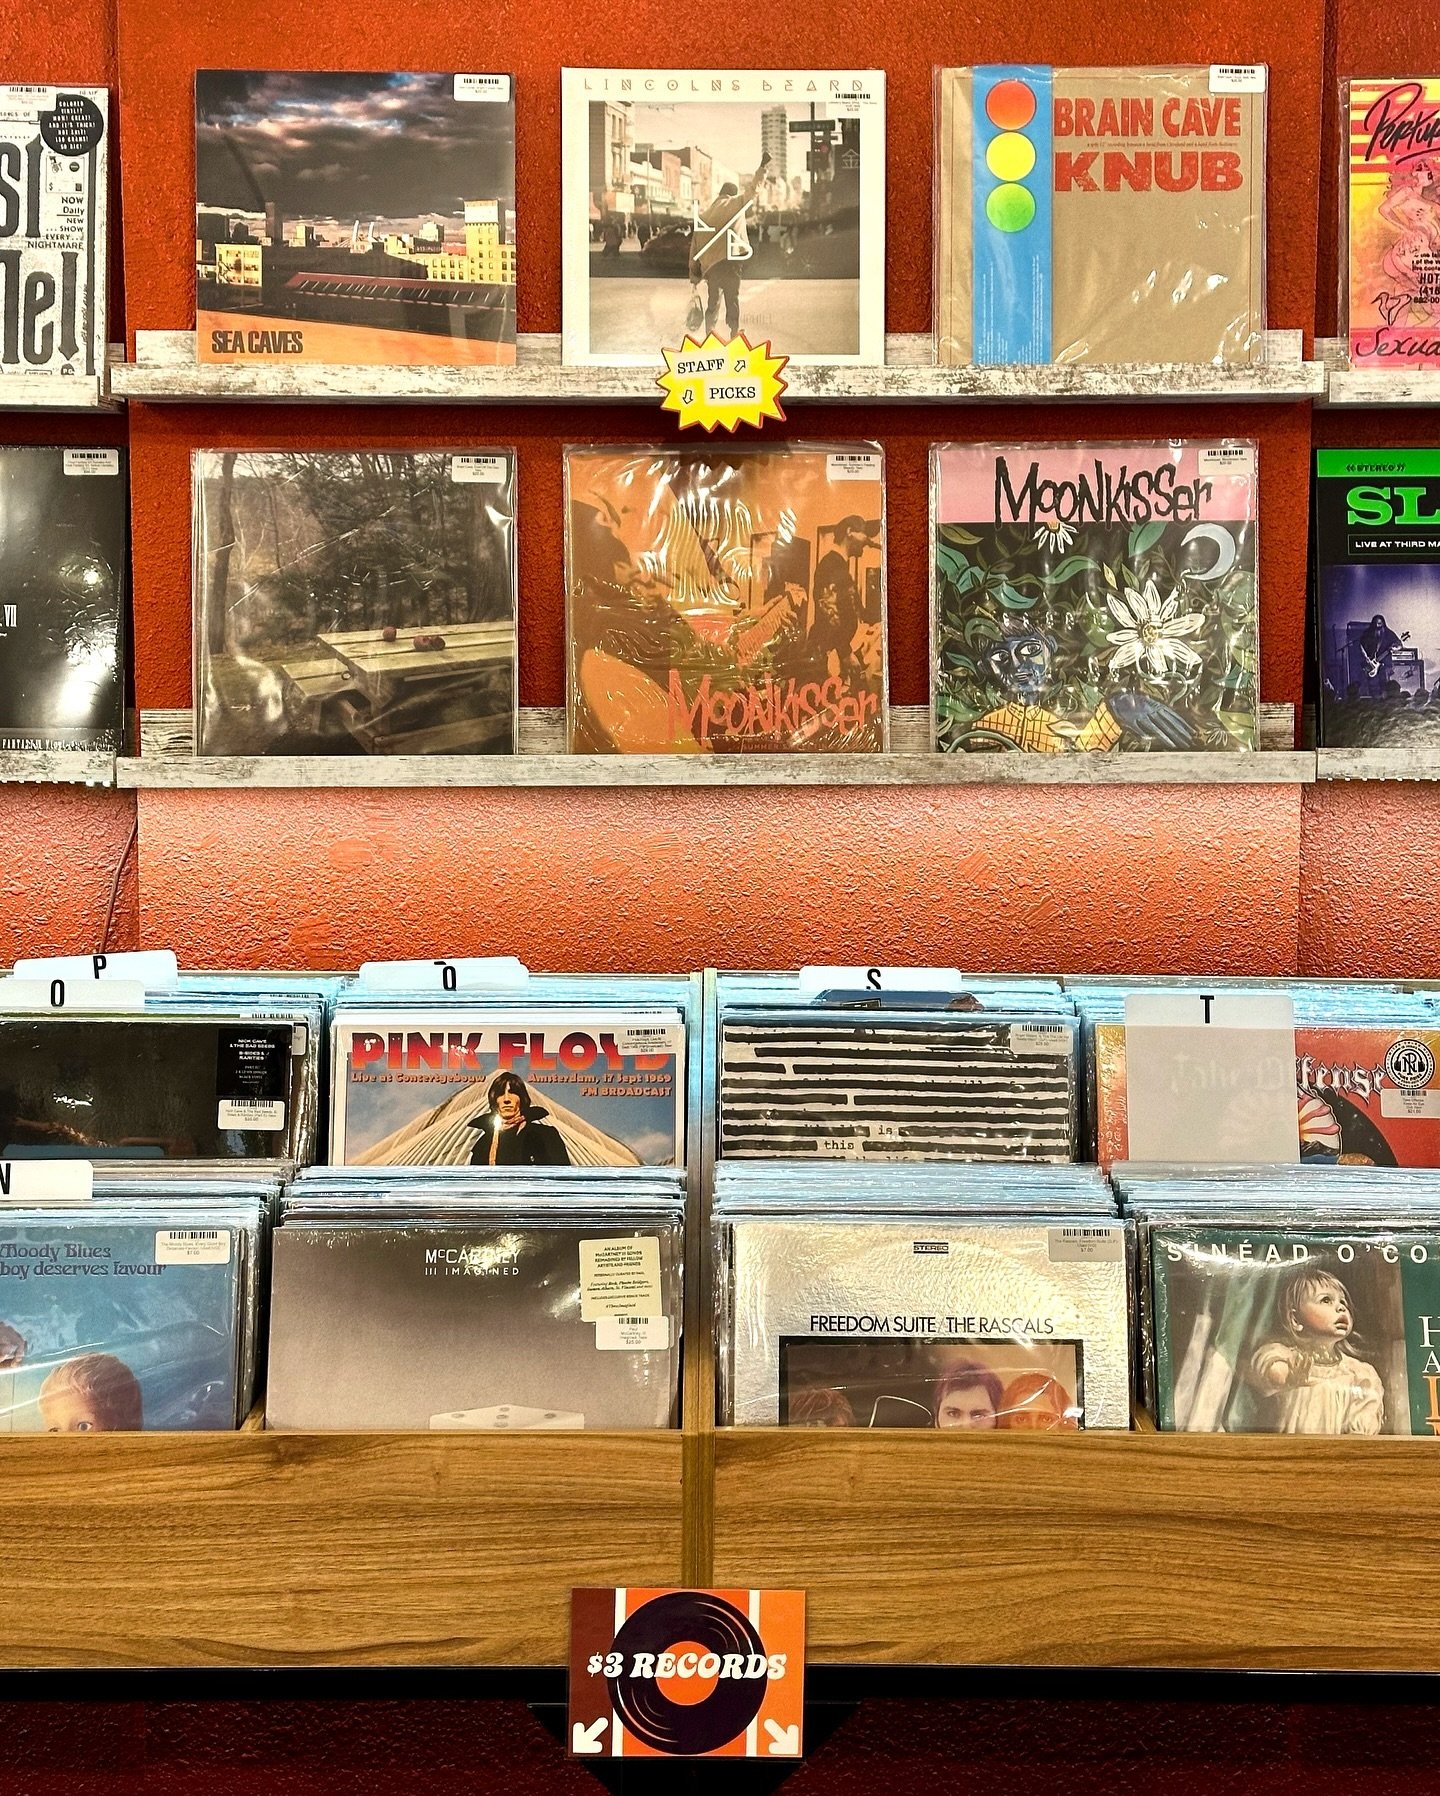 Check out this week&rsquo;s staff picks featuring records from bands that recently rocked our space! 
Swing by to grab sweet releases from @seacavesmusic, @lincolns.beard, @brain__cave, and @moonkisserpdx 🎶👌